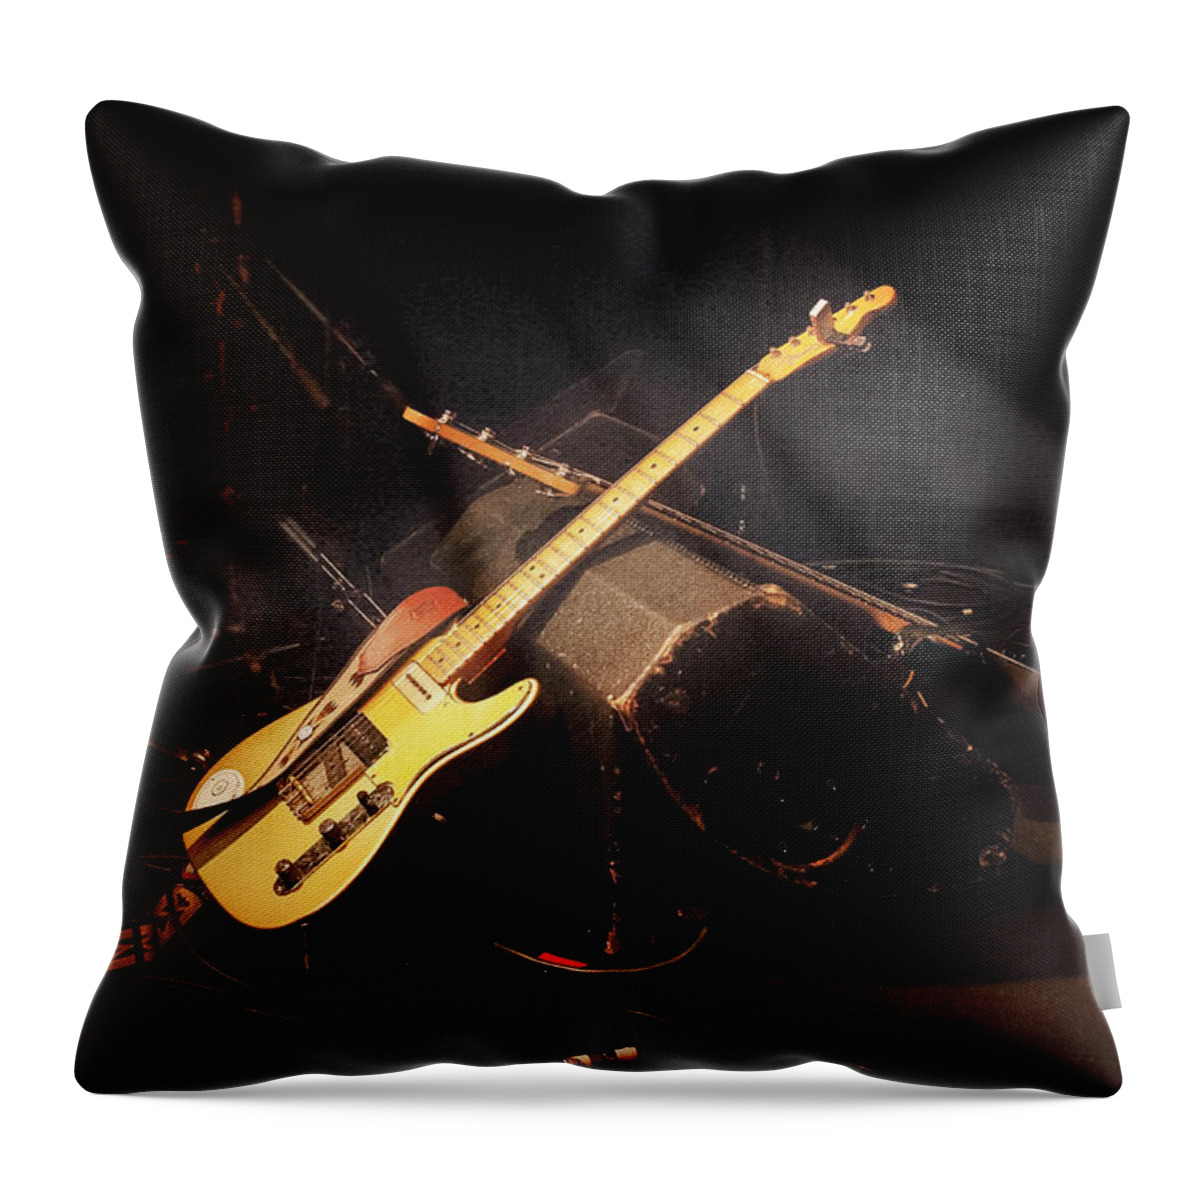 Feedback Throw Pillow featuring the photograph Feedback by Micah Offman